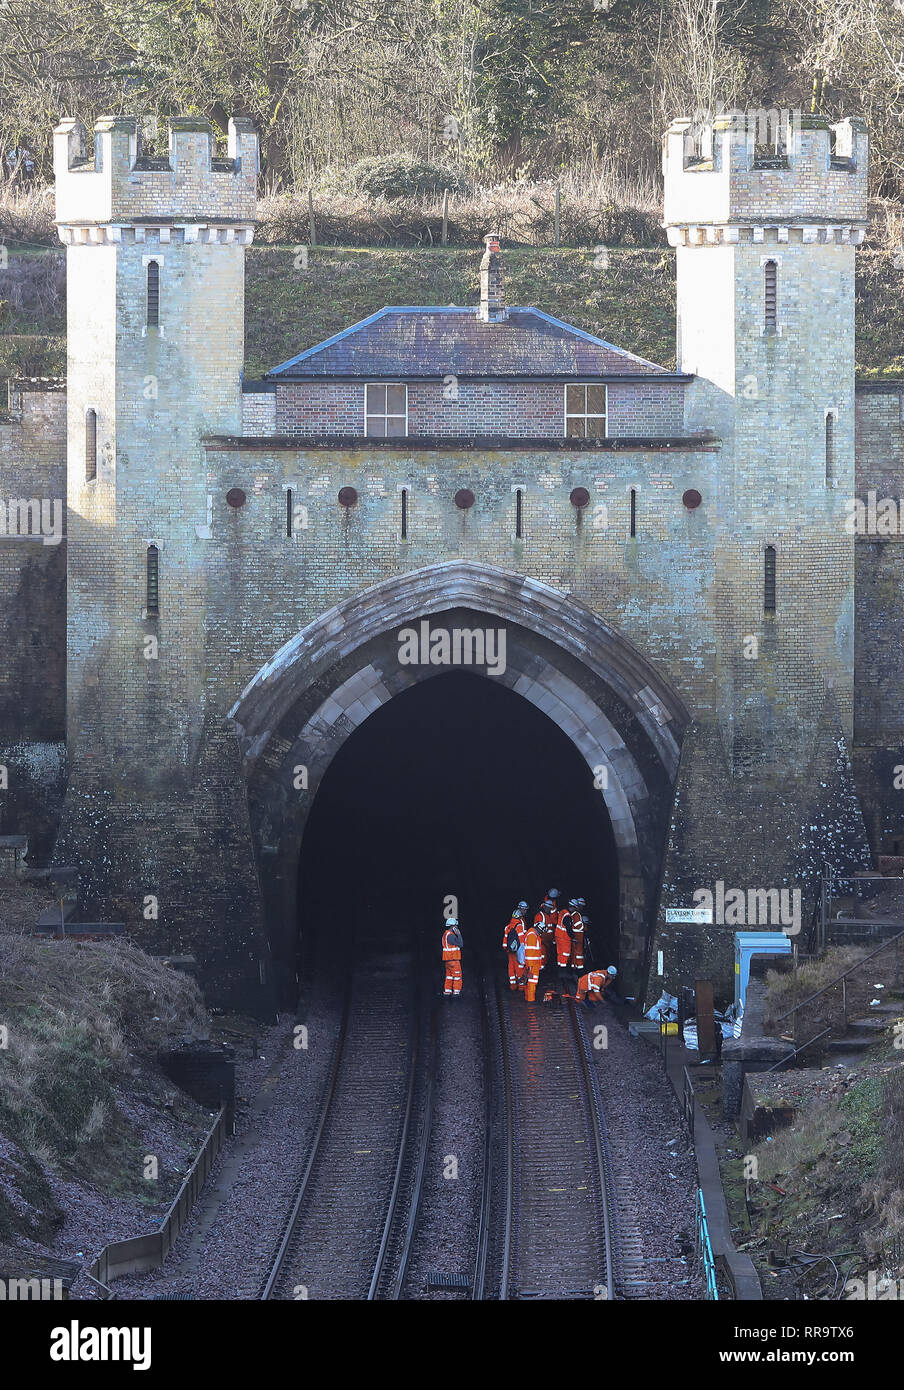 Network Rail engineers work on the track at North entrance to Clayton tunnel on the Brighton Main Line. The 1 mile 506 yard long tunnel is the longest tunnel on the line and was completed in 1841 The improvement works on the Brighton Main Line are a key part of a £300 million government-funded programme to tackle delay hotspots and boost the reliability of the railway in the south east, including the expanded Thameslink network. The Brighton Main Line is a key rail route, connecting Gatwick Airport and the south coast with London, and is used by 300,000 people each day. 20 February 2019 Stock Photo